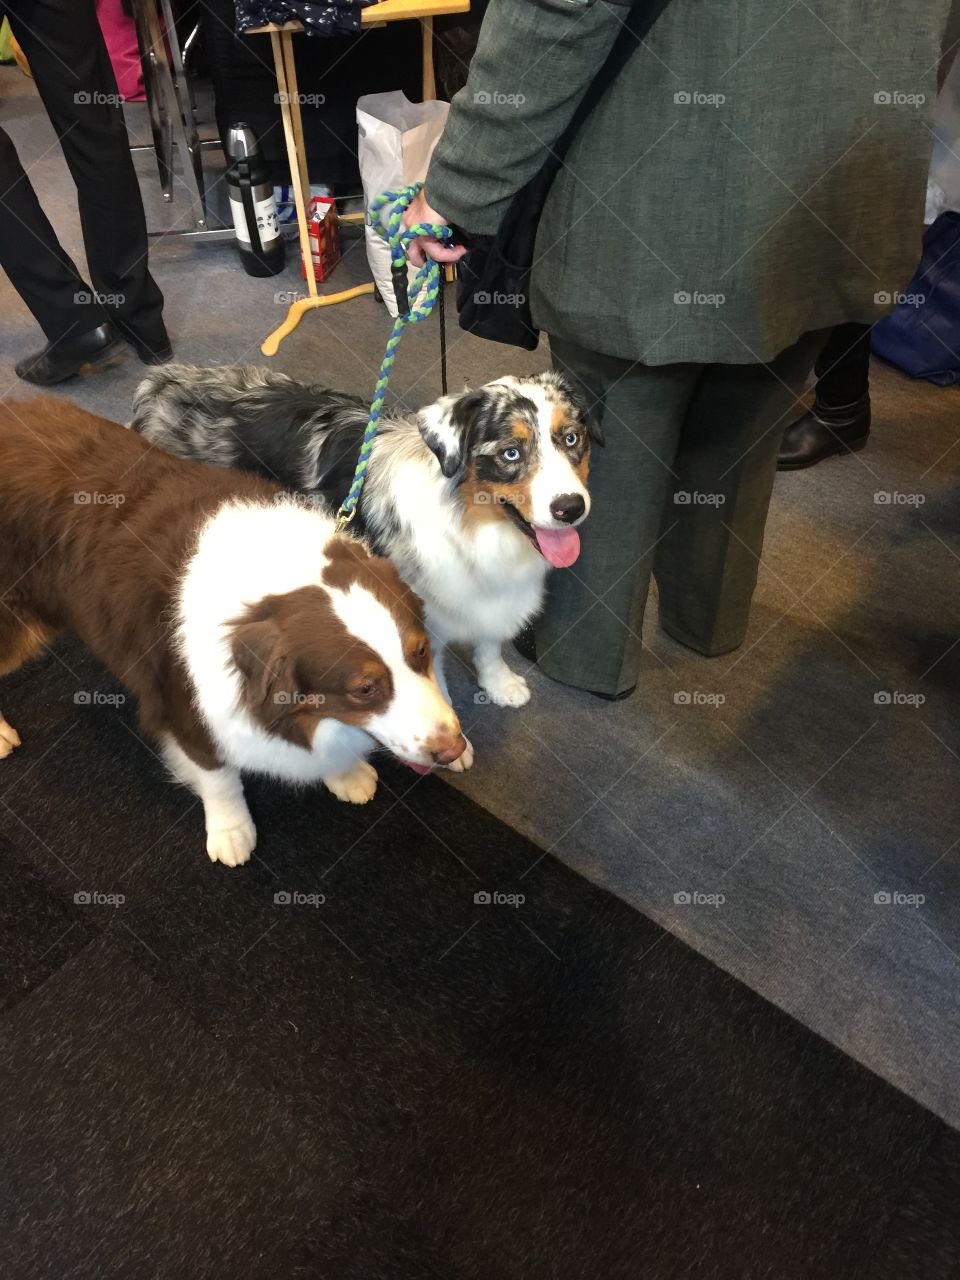 Dogs at Crufts